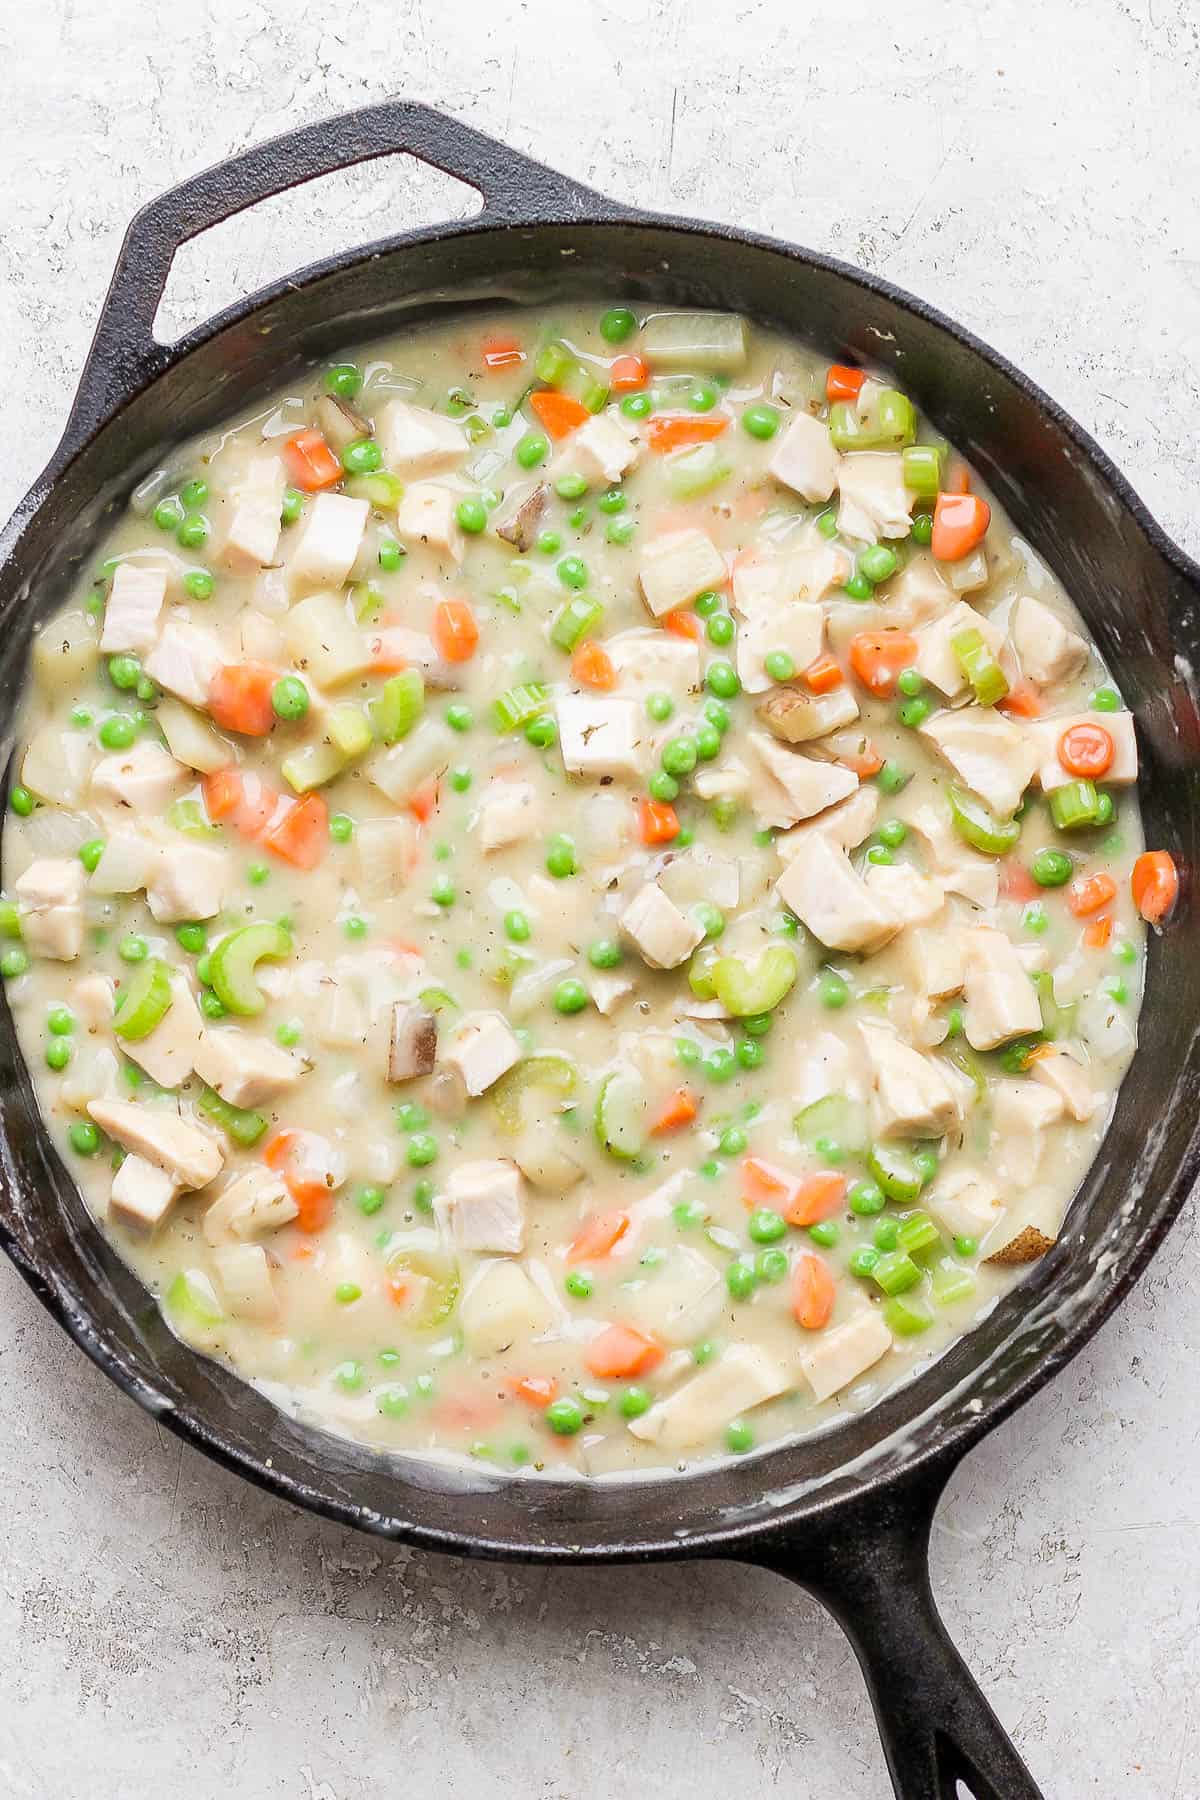 The turkey pot pie filling in a cast iron skillet.